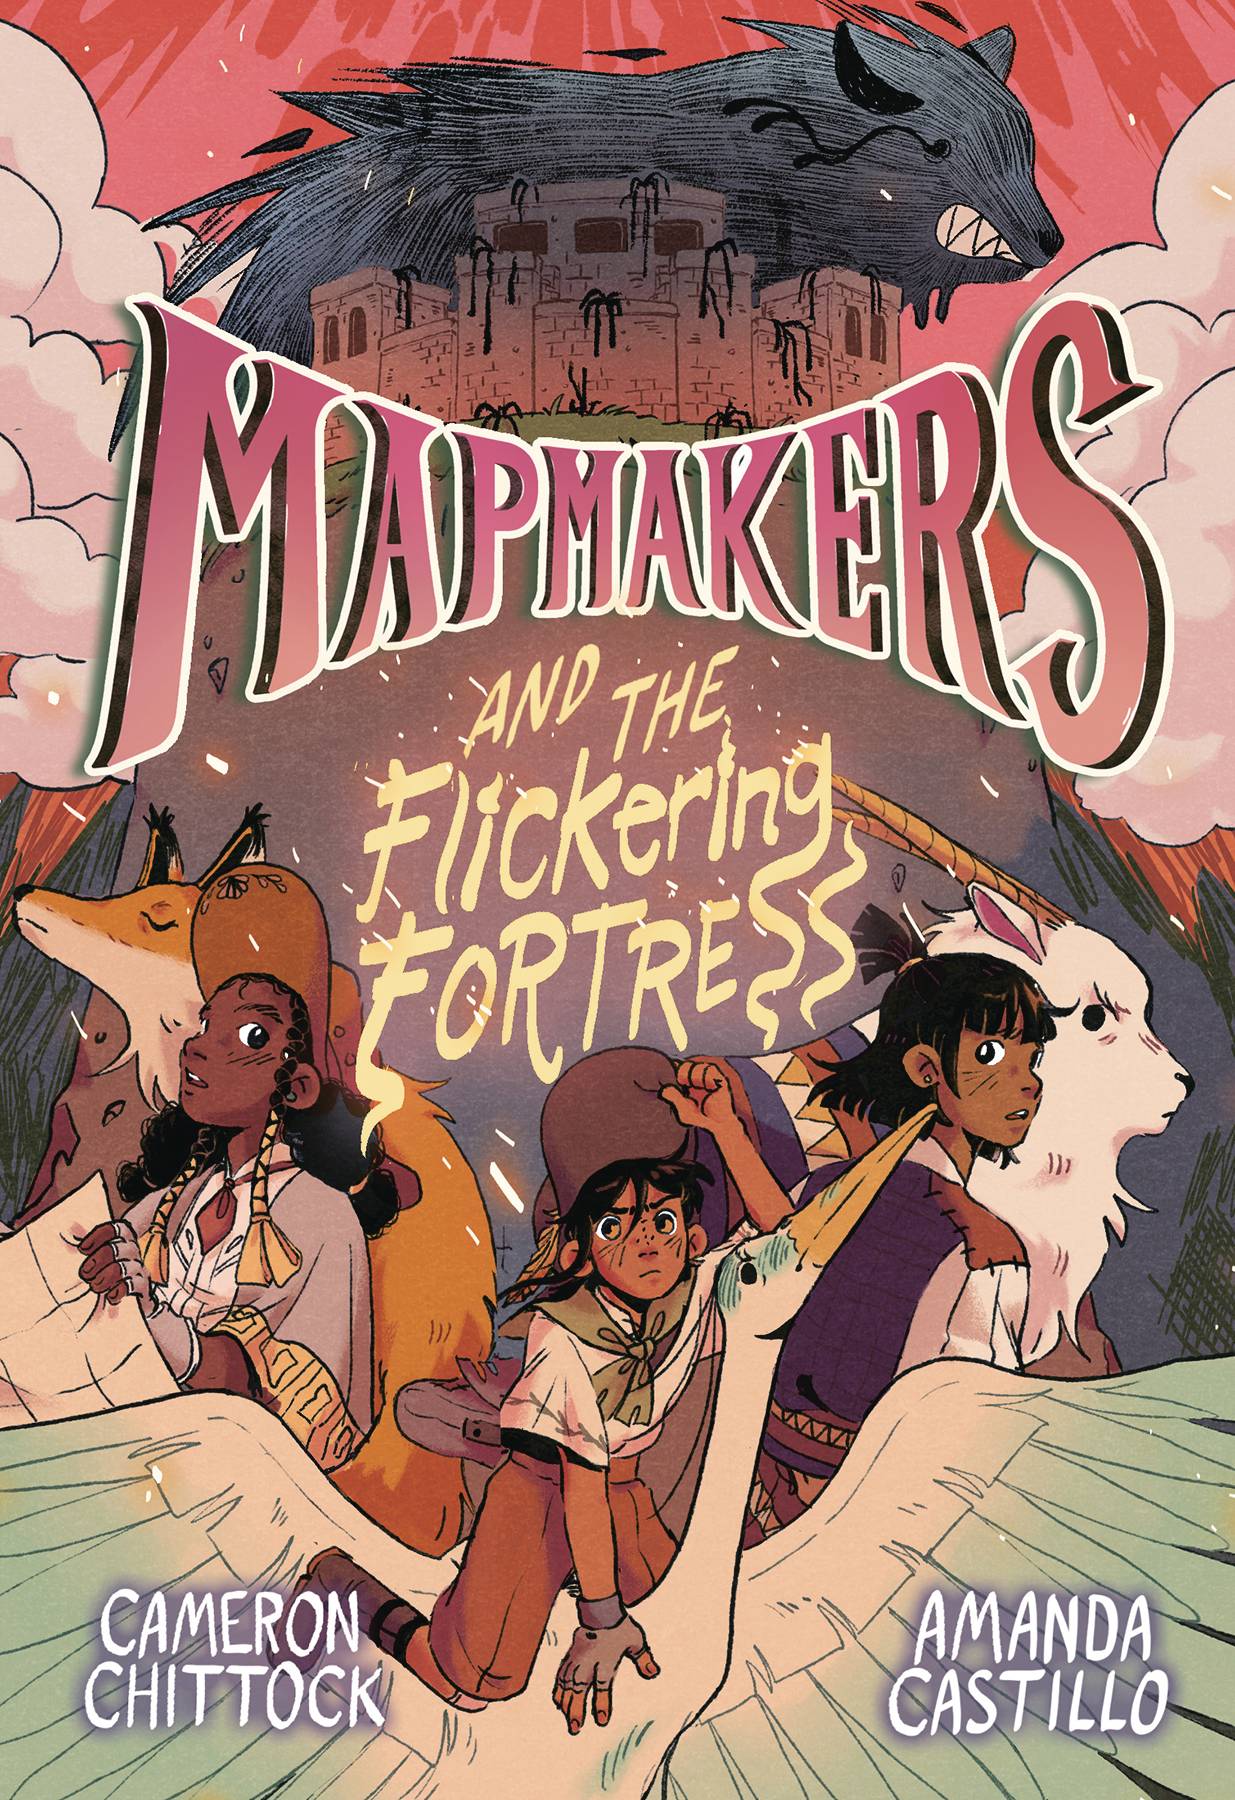 MAPMAKERS HC 03 FLICKERING FORTRESS